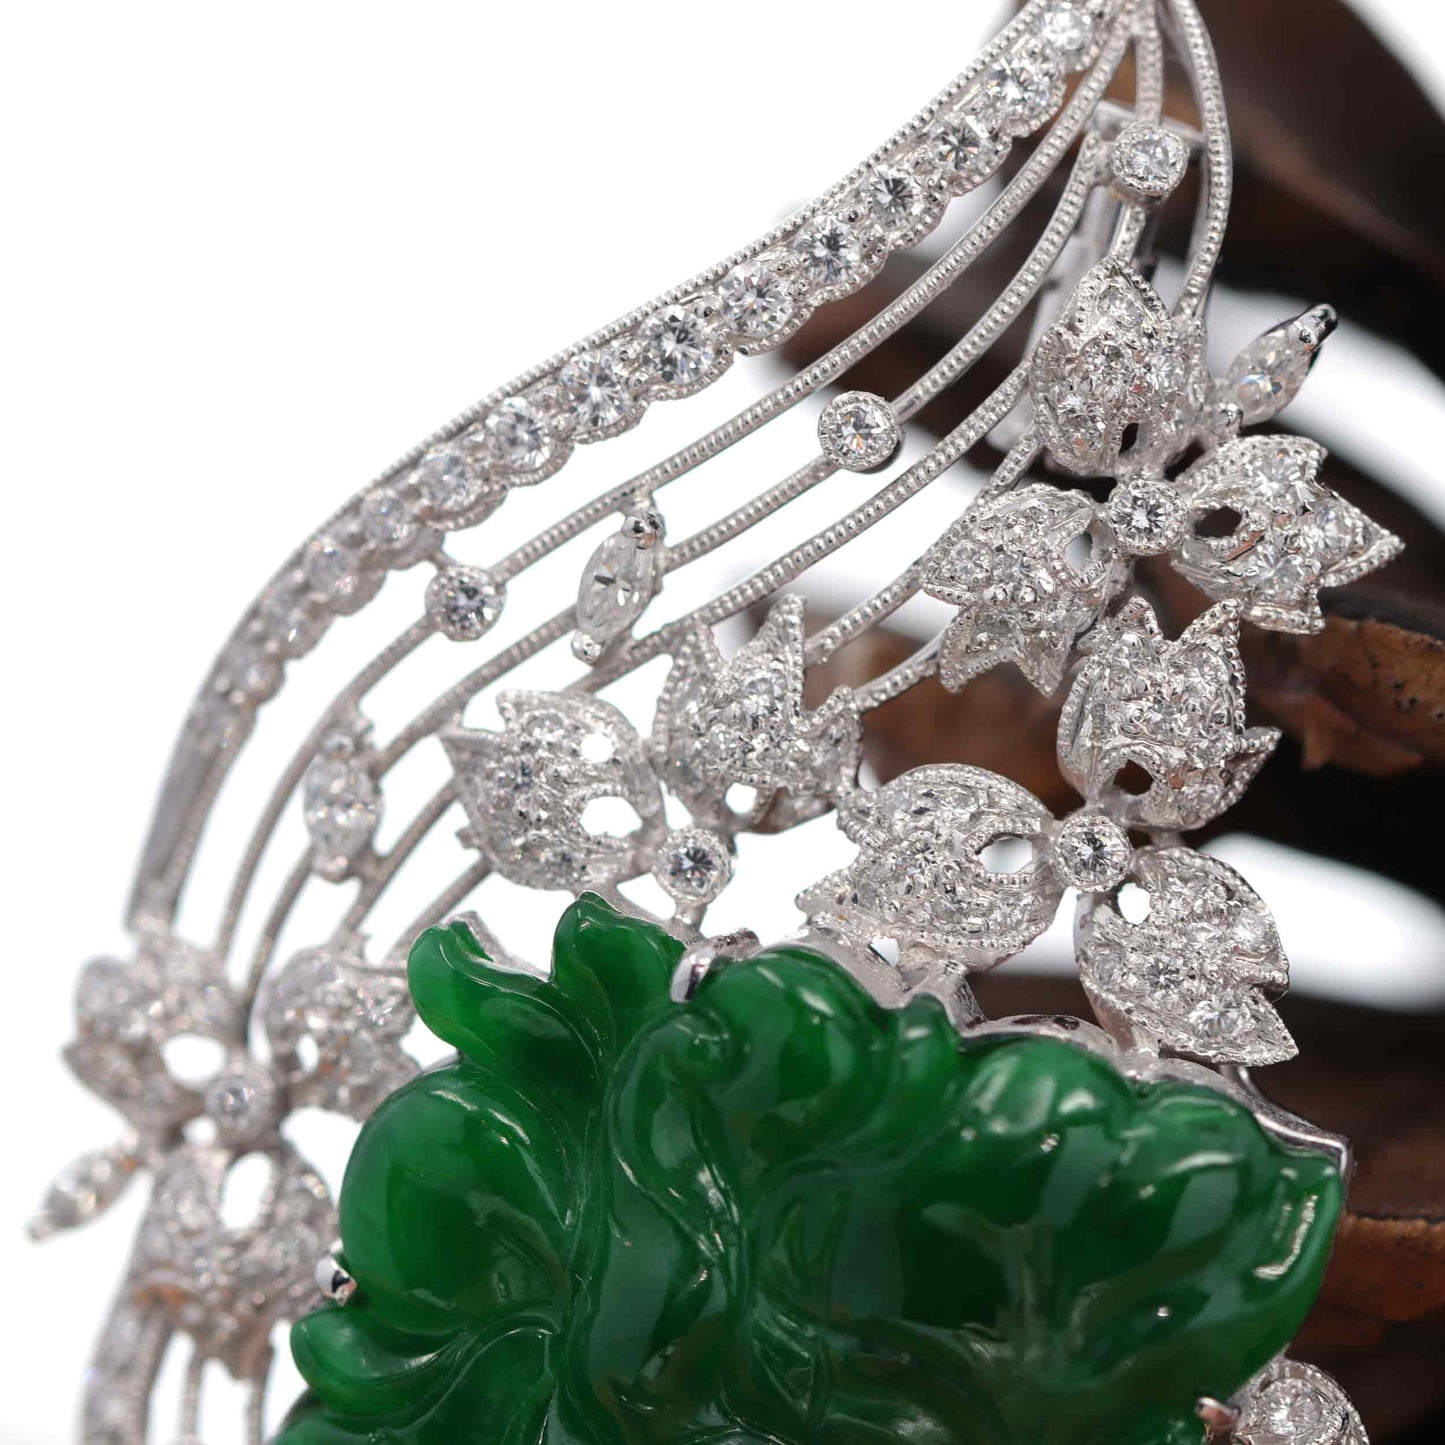 RealJade® "Imperial Butterfly" 18K White Gold Genuine Imperial Jadeite Pendant & Brooch with Diamonds